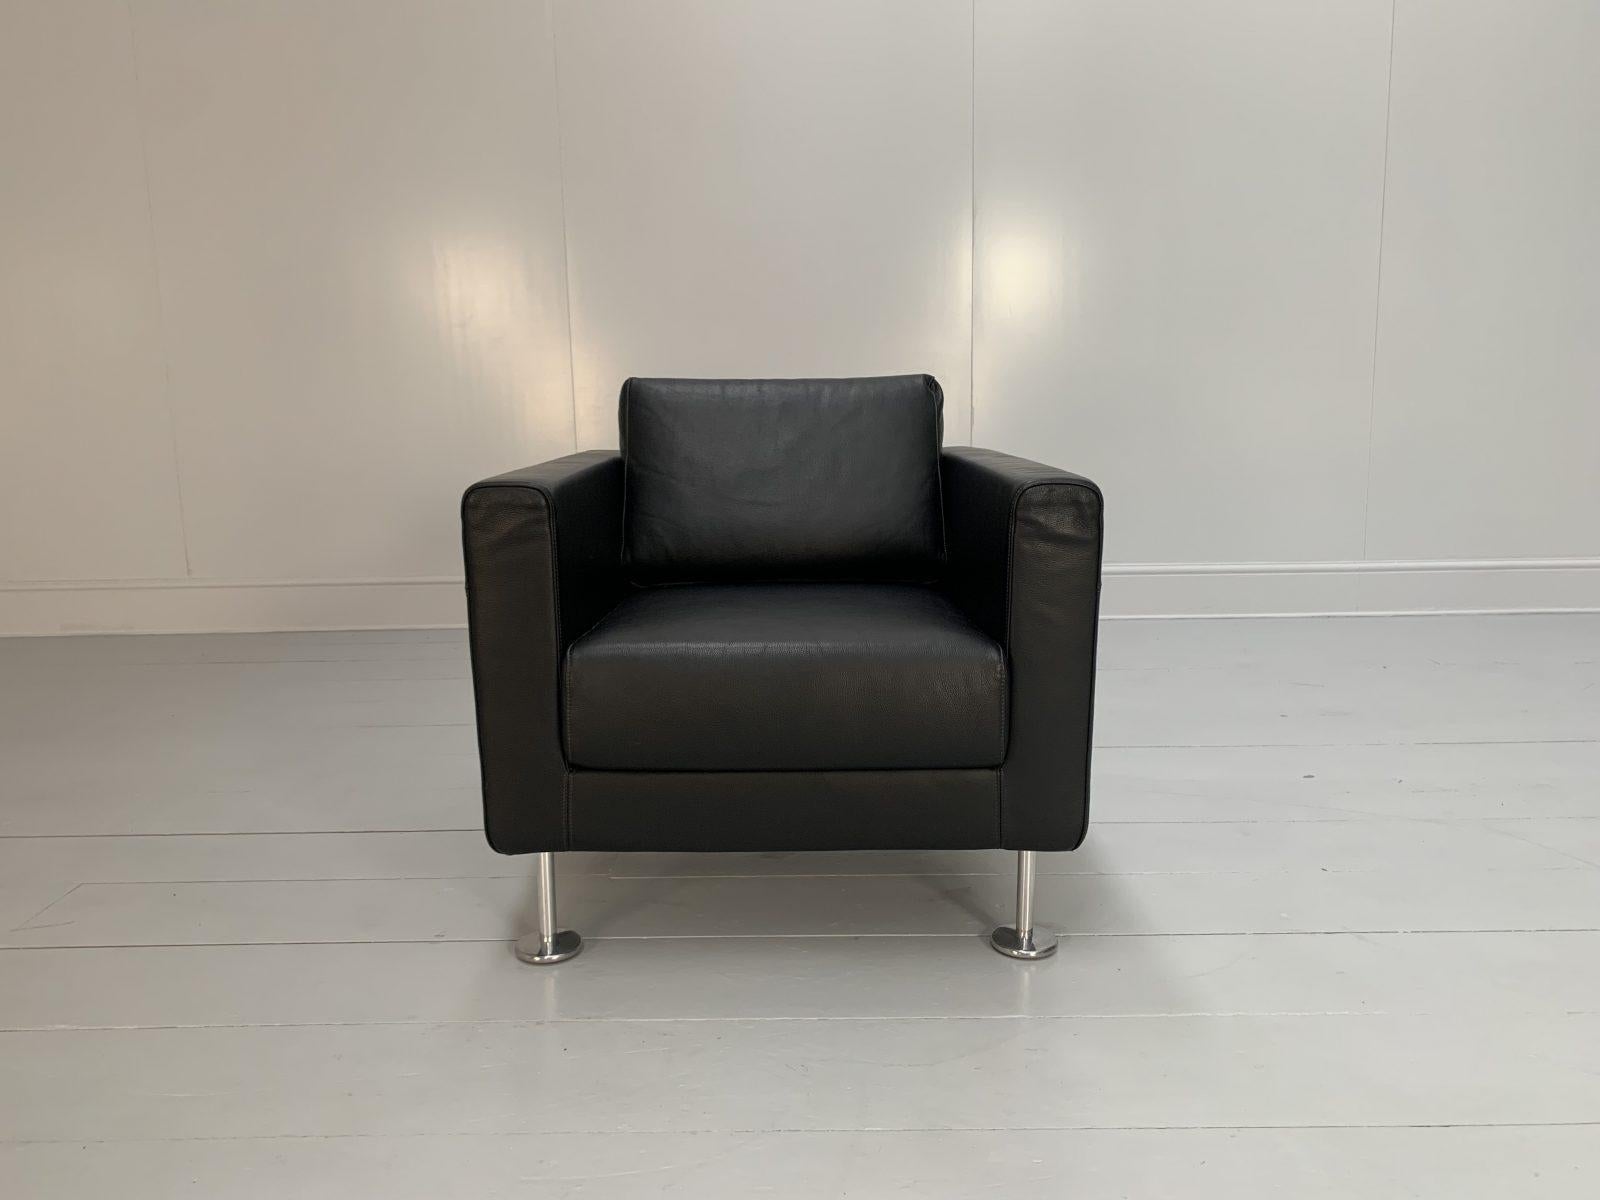 Vitra “Park” Armchair – In Jet Black Leather In Good Condition For Sale In Barrowford, GB